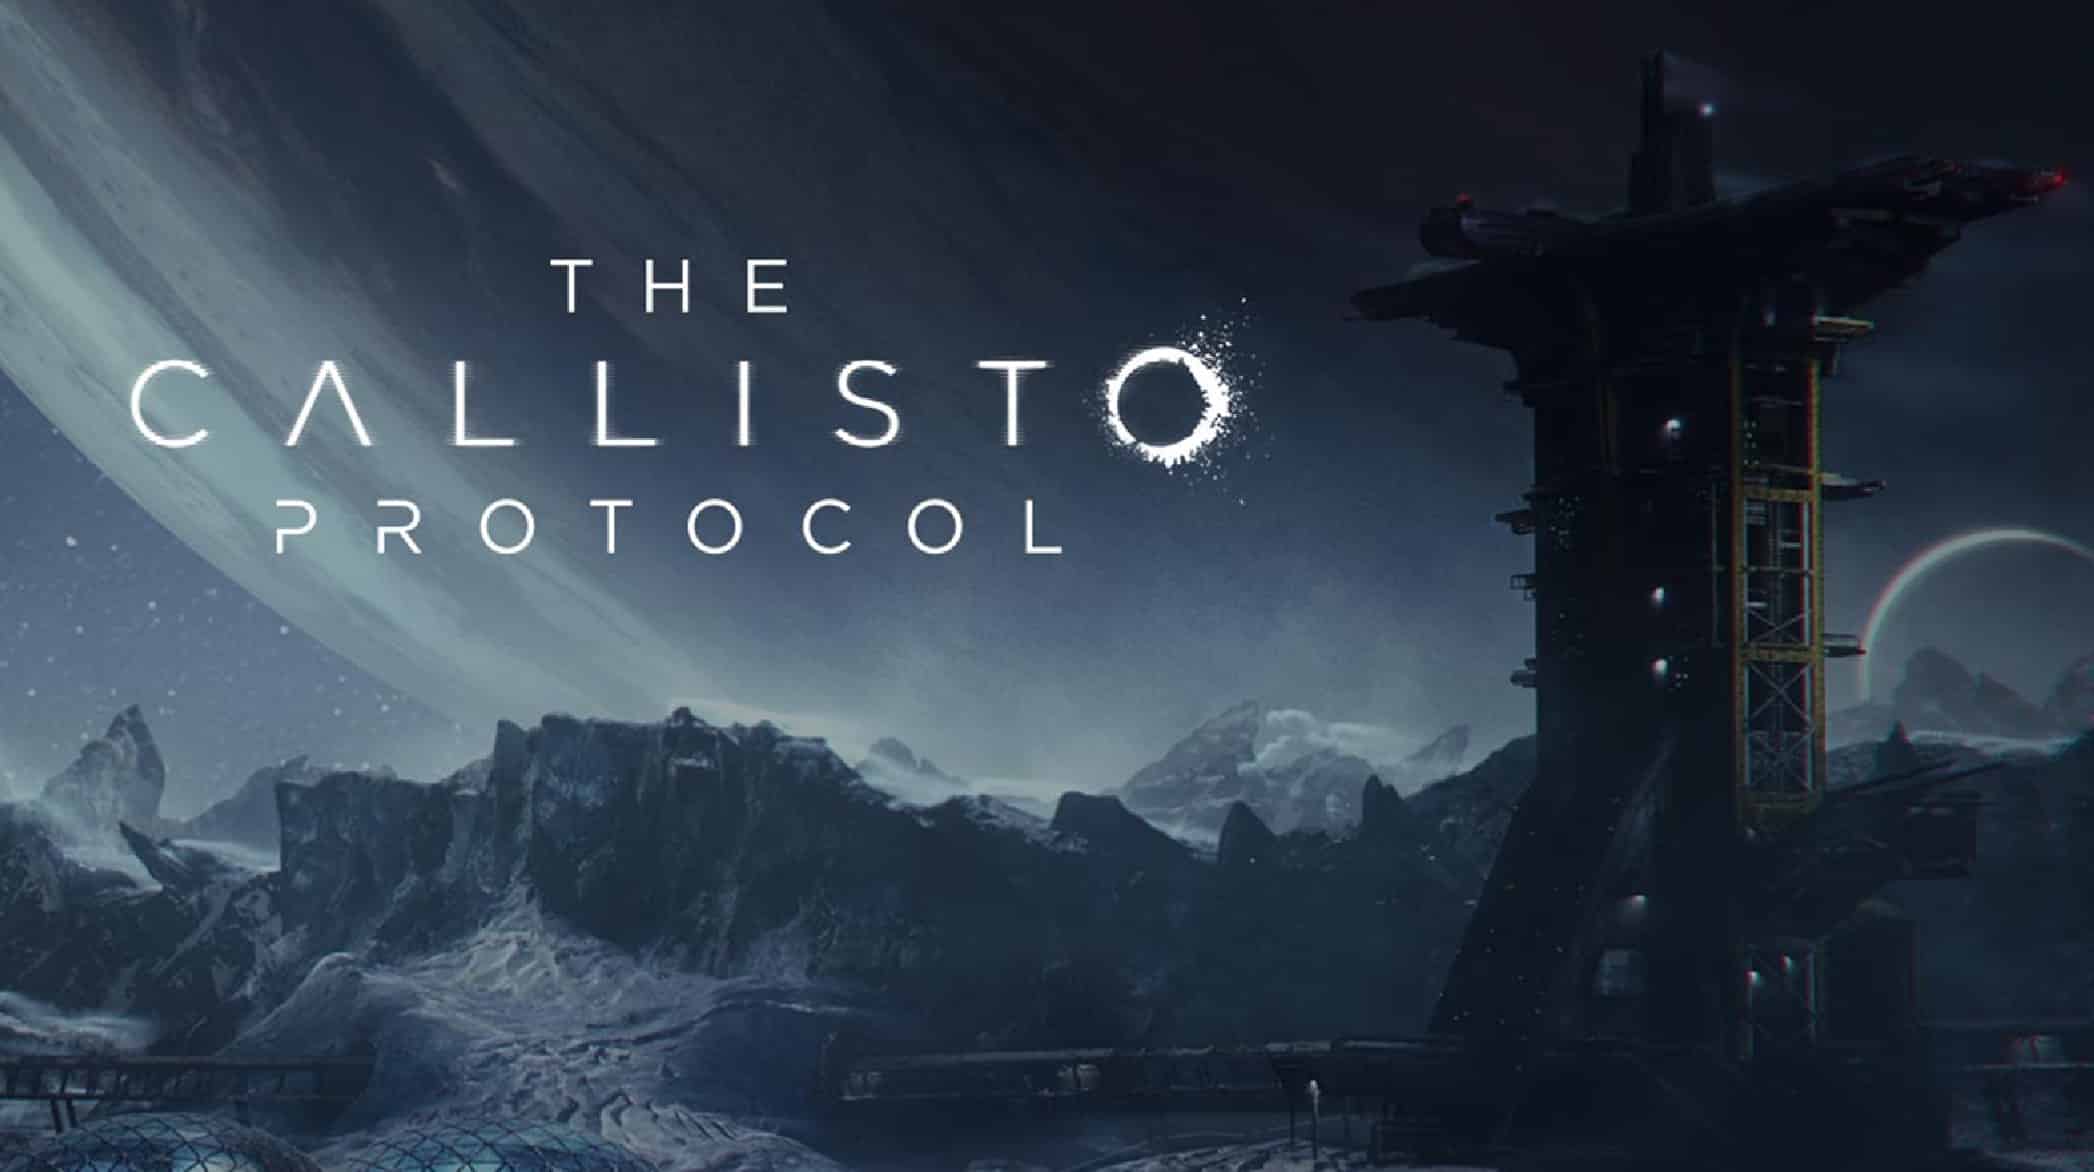 Game Length Play Time: How Long to Beat The Callisto Protocol?